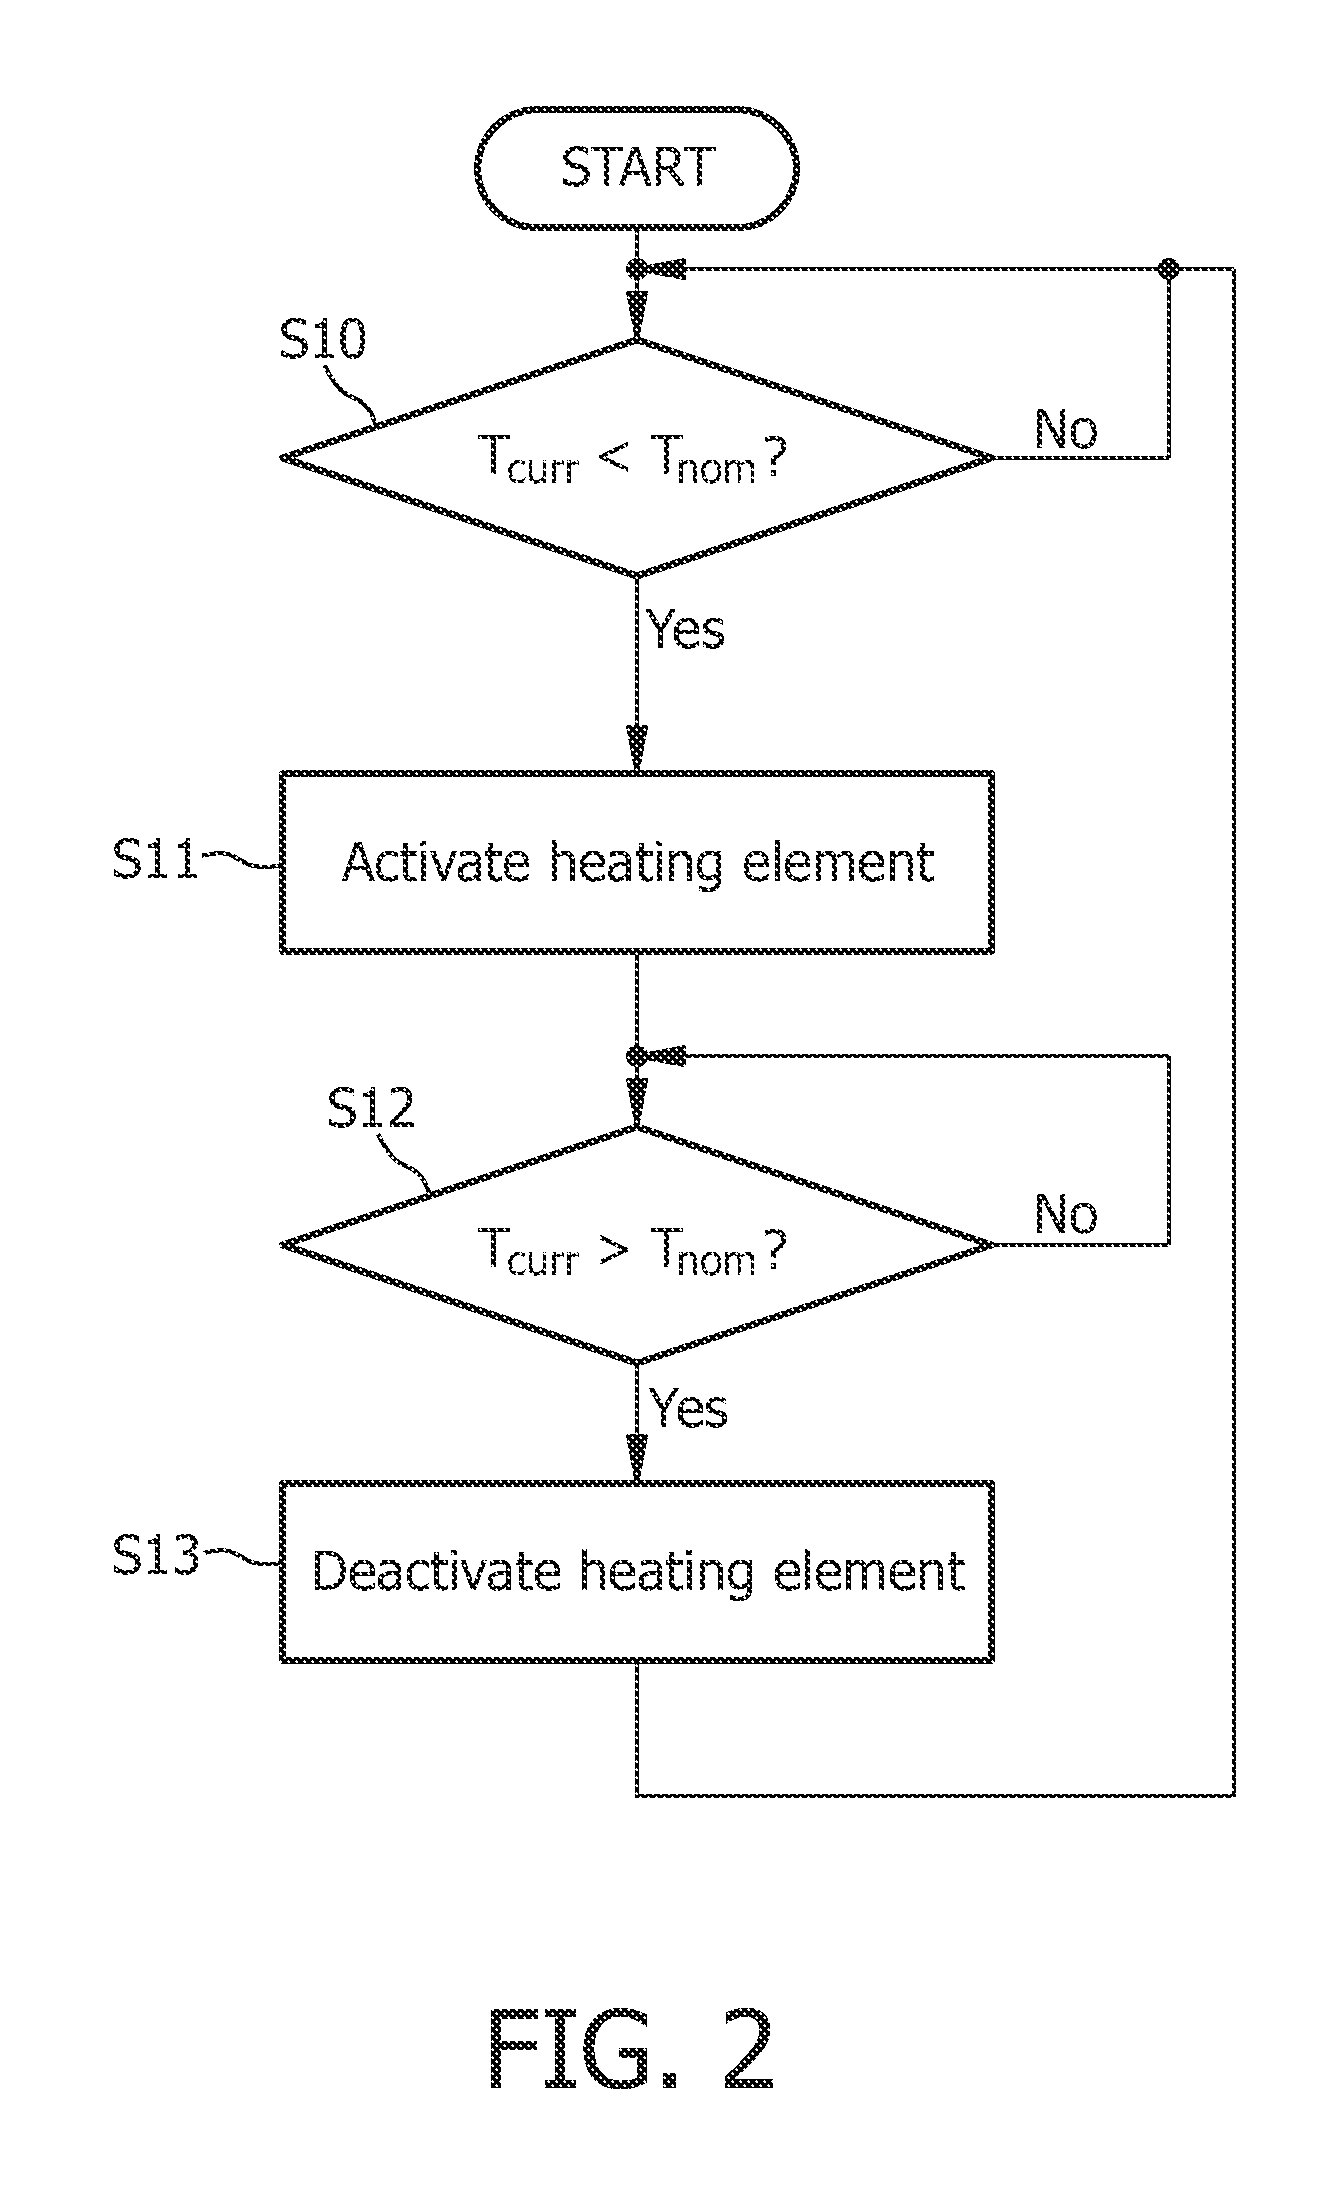 Apparatus and method for generating steam